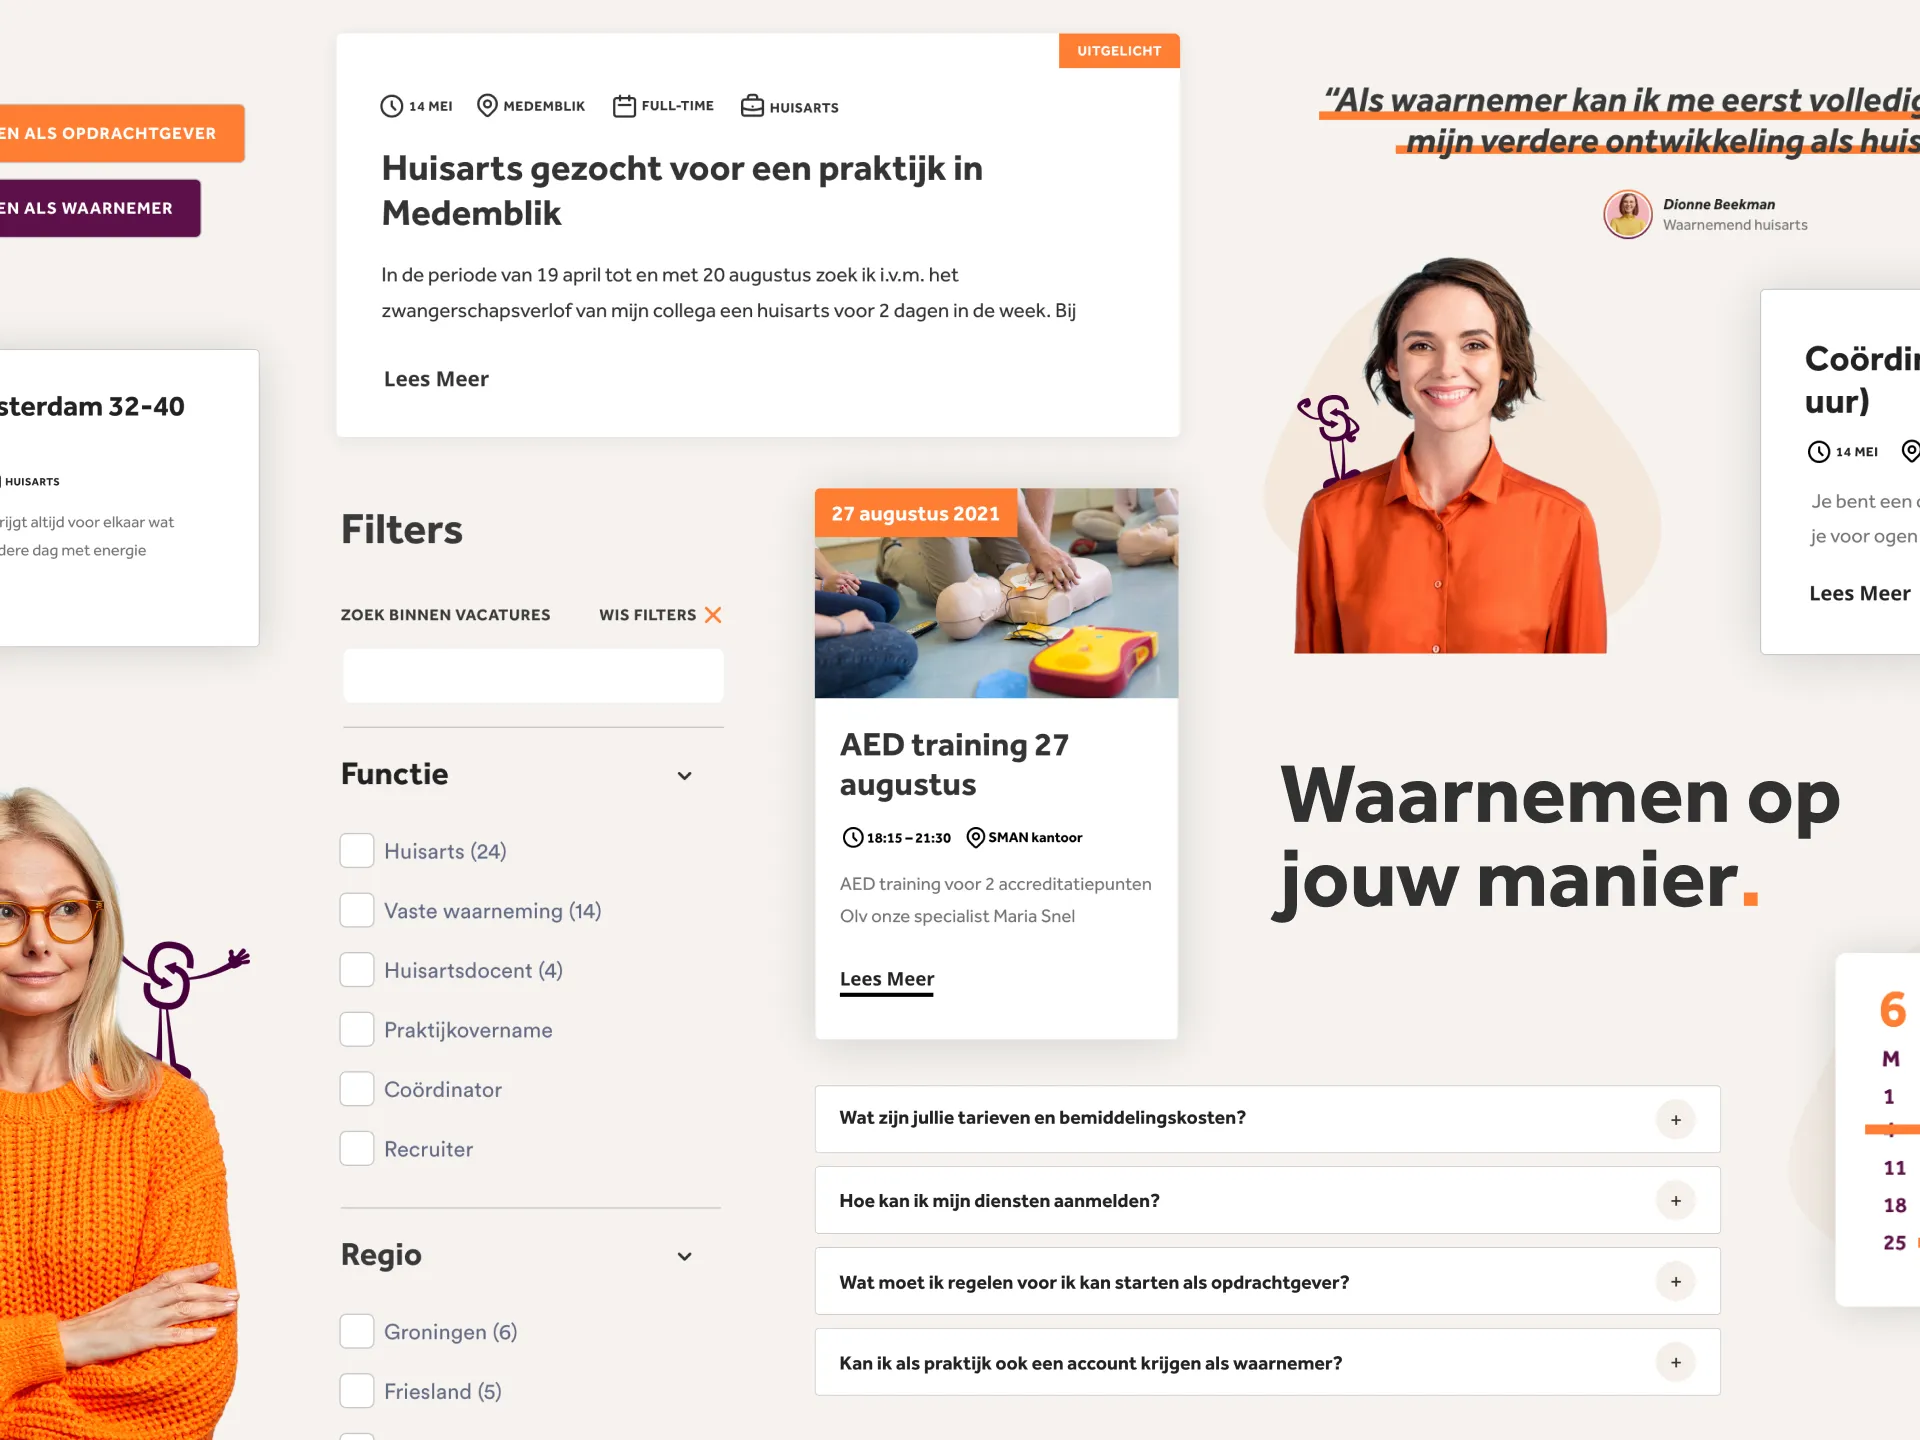 Design kit with several UI elements mixed with photography of women in orange clothing